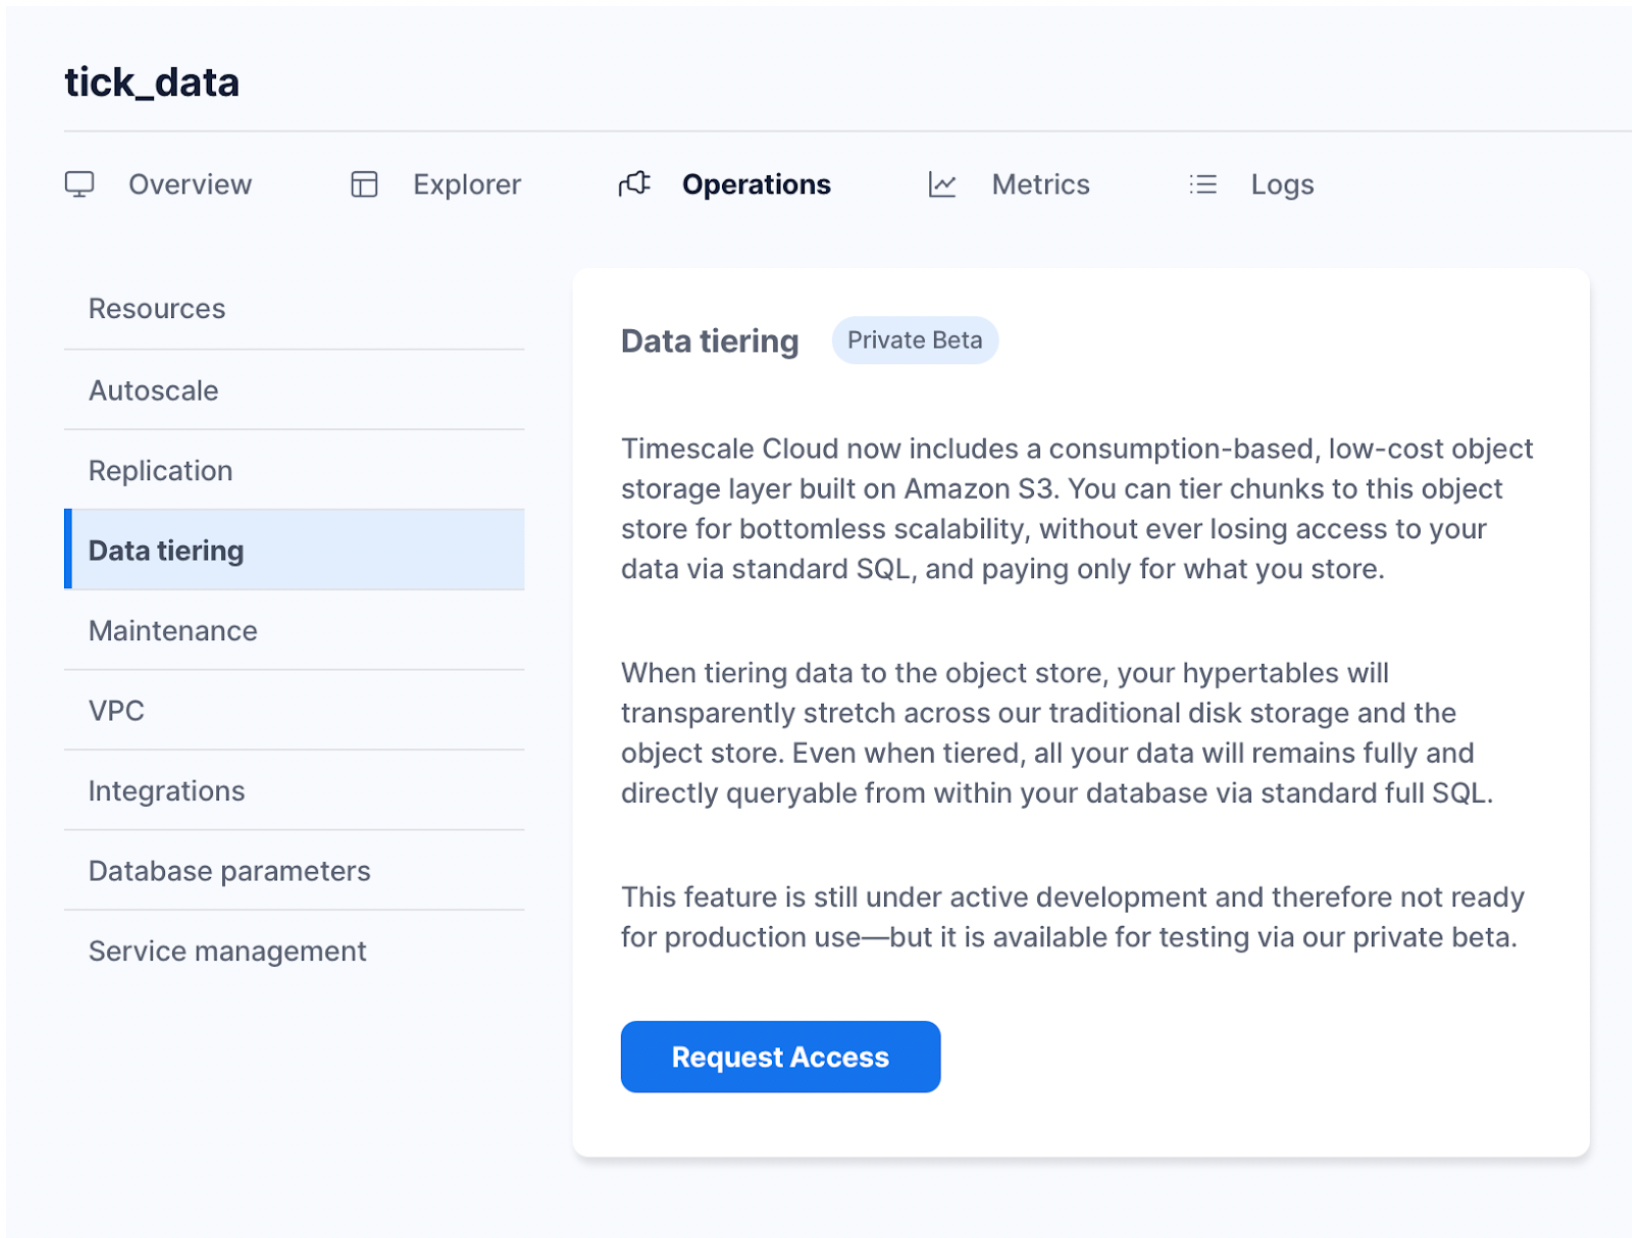 Timescale Cloud's UI where you can request access to private beta